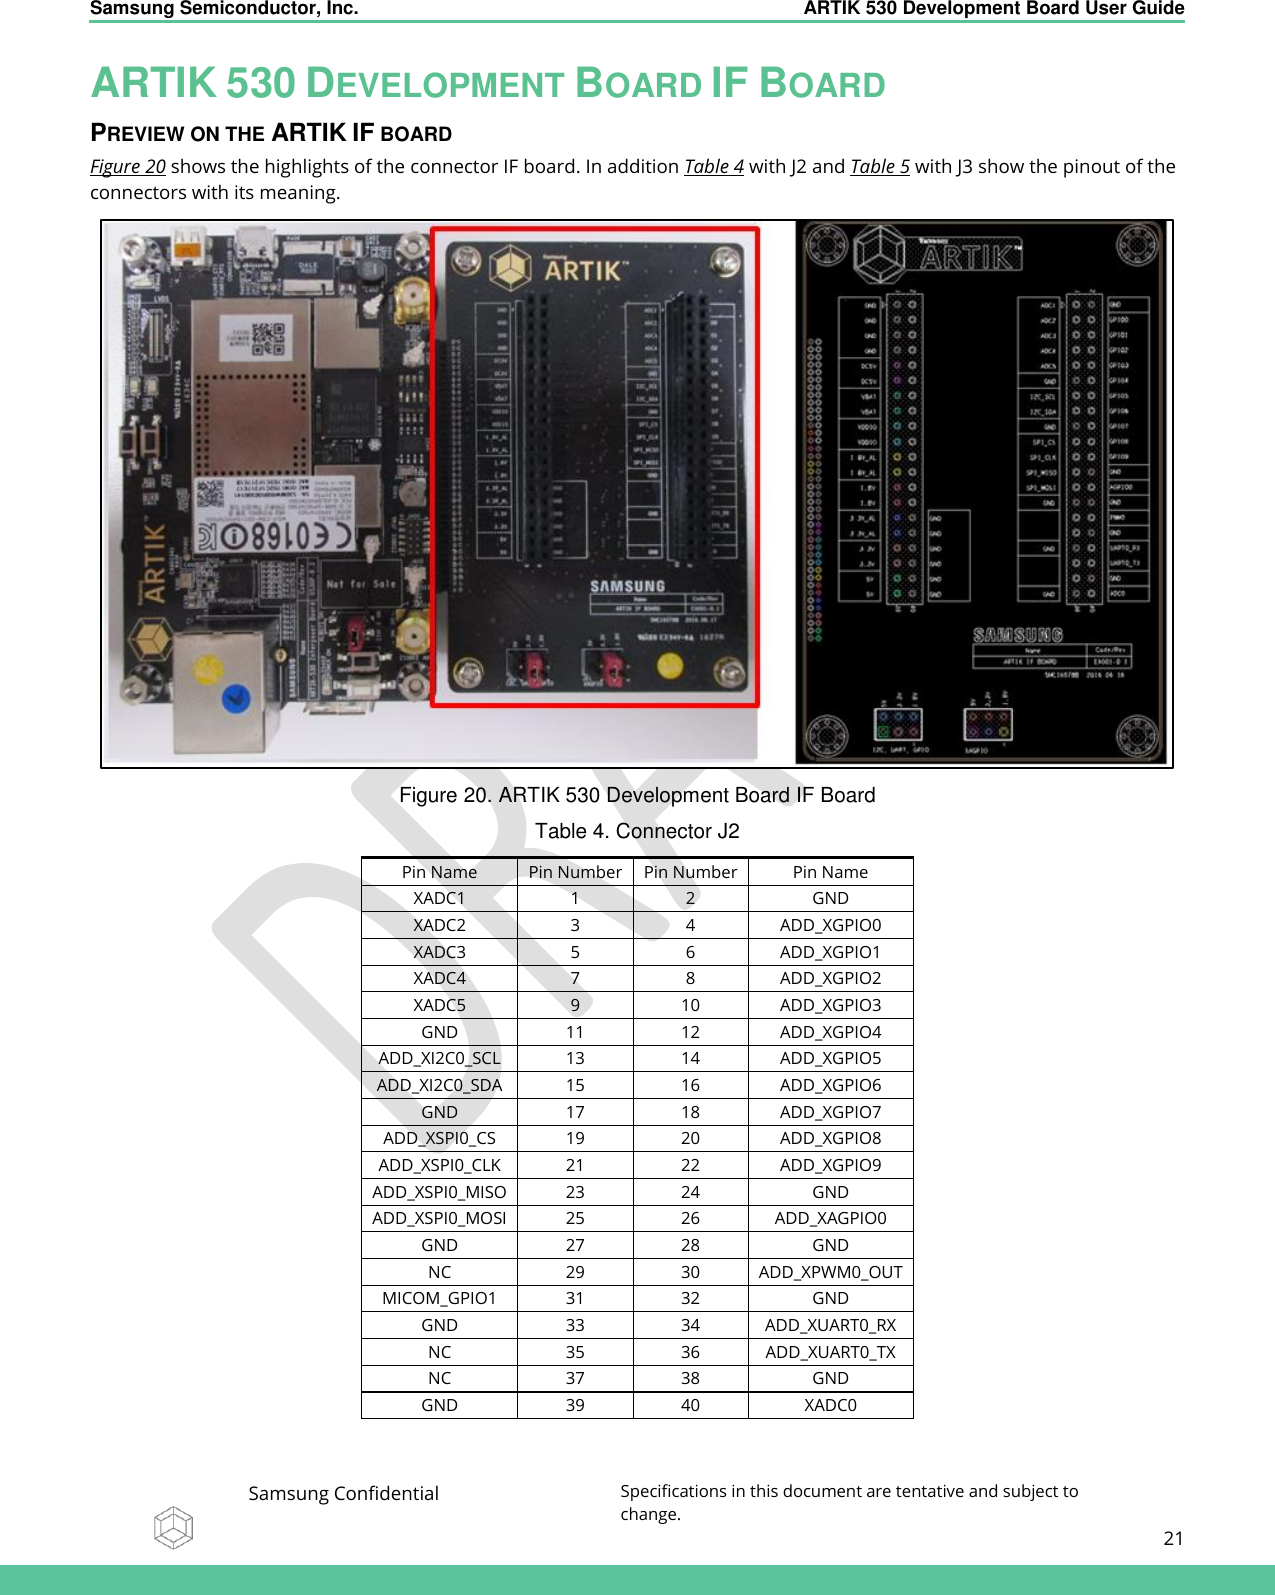    Samsung Semiconductor, Inc.  ARTIK 530 Development Board User Guide   Samsung Confidential Specifications in this document are tentative and subject to change.  21   ARTIK 530 DEVELOPMENT BOARD IF BOARD PREVIEW ON THE ARTIK IF BOARD Figure 20 shows the highlights of the connector IF board. In addition Table 4 with J2 and Table 5 with J3 show the pinout of the connectors with its meaning.  Figure 20. ARTIK 530 Development Board IF Board Table 4. Connector J2 Pin Name Pin Number Pin Number Pin Name XADC1 1 2 GND XADC2 3 4 ADD_XGPIO0 XADC3 5 6 ADD_XGPIO1 XADC4 7 8 ADD_XGPIO2 XADC5 9 10 ADD_XGPIO3 GND 11 12 ADD_XGPIO4 ADD_XI2C0_SCL 13 14 ADD_XGPIO5 ADD_XI2C0_SDA 15 16 ADD_XGPIO6 GND 17 18 ADD_XGPIO7 ADD_XSPI0_CS 19 20 ADD_XGPIO8 ADD_XSPI0_CLK 21 22 ADD_XGPIO9 ADD_XSPI0_MISO 23 24 GND ADD_XSPI0_MOSI 25 26 ADD_XAGPIO0 GND 27 28 GND NC 29 30 ADD_XPWM0_OUT MICOM_GPIO1 31 32 GND GND 33 34 ADD_XUART0_RX NC 35 36 ADD_XUART0_TX NC 37 38 GND GND 39 40 XADC0  